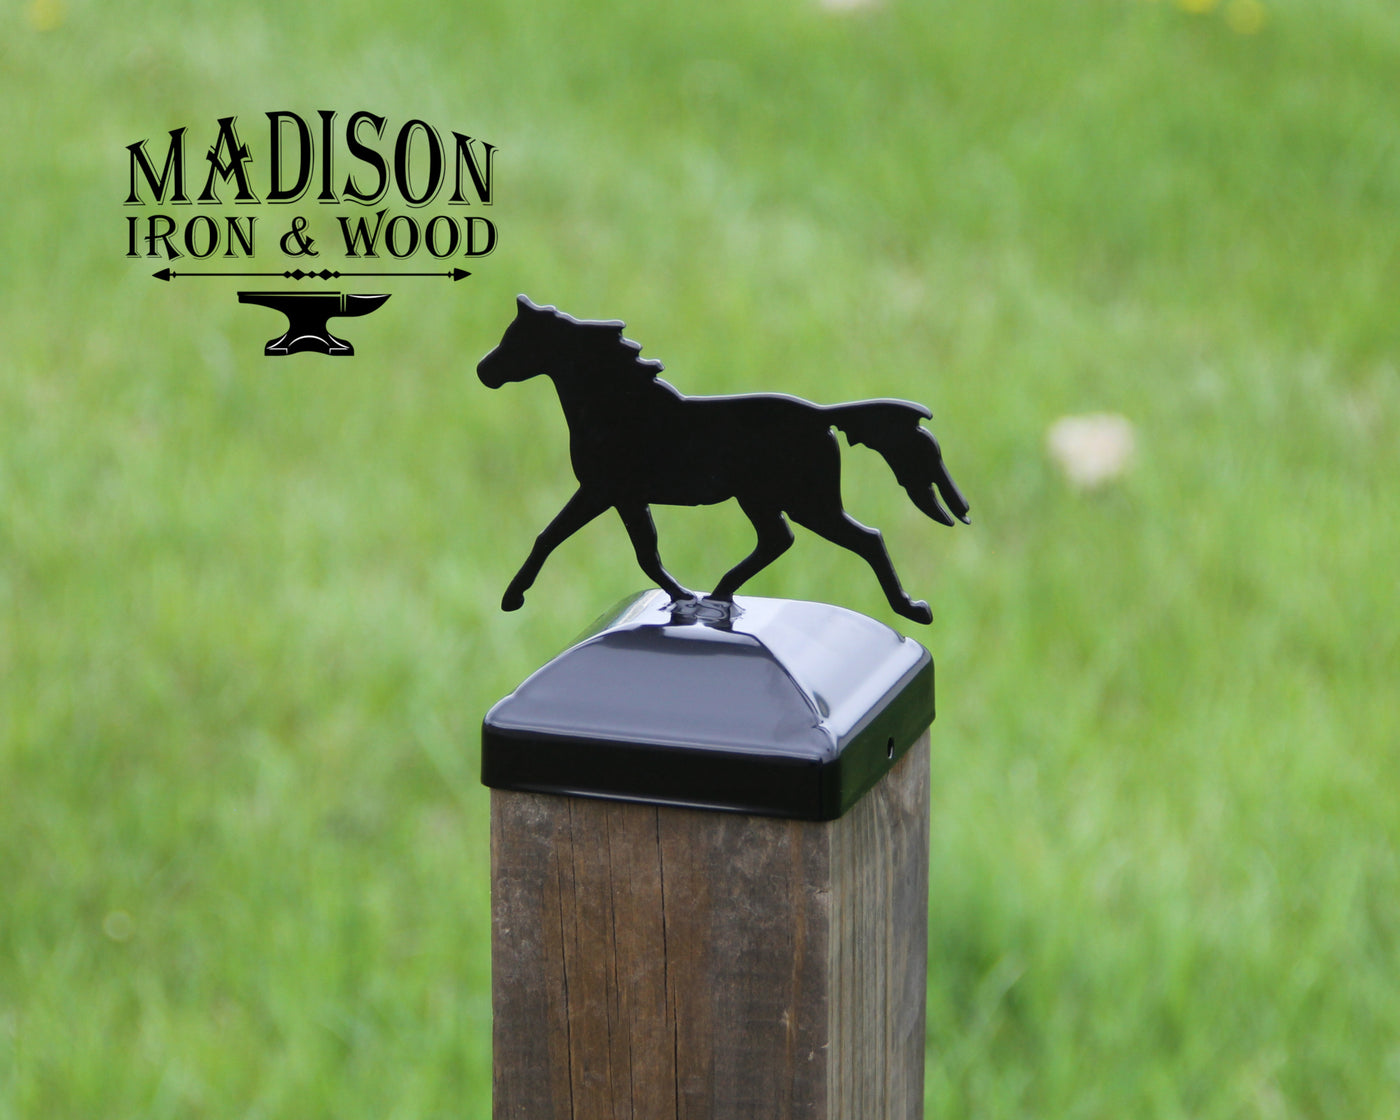 4X4 Trotting Horse Post Cap - Madison Iron and Wood - Post Cap - metal outdoor decor - Steel deocrations - american made products - veteran owned business products - fencing decorations - fencing supplies - custom wall decorations - personalized wall signs - steel - decorative post caps - steel post caps - metal post caps - brackets - structural brackets - home improvement - easter - easter decorations - easter gift - easter yard decor